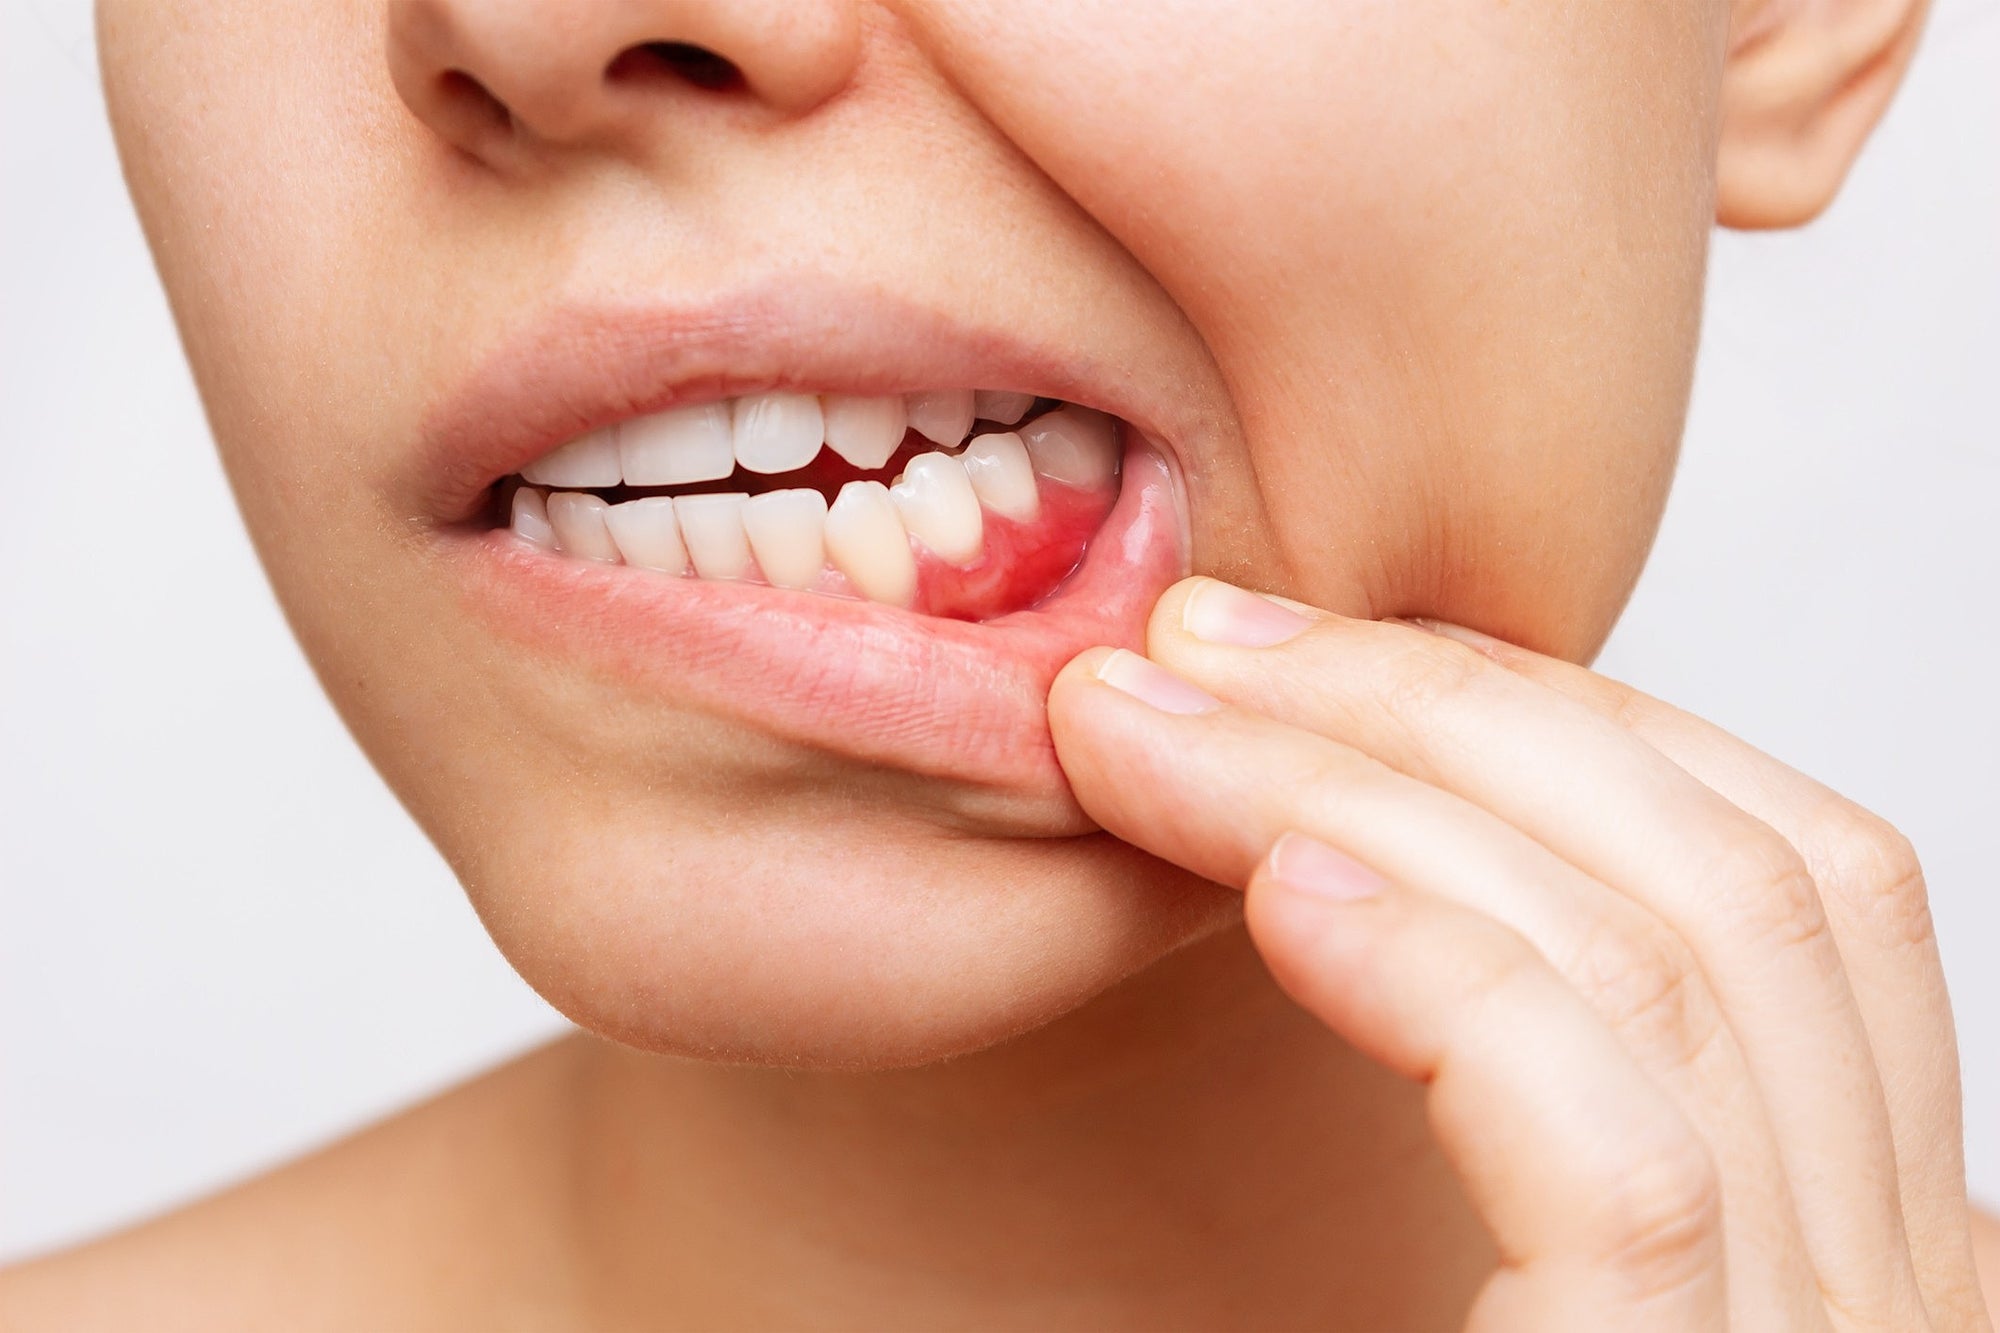 Bleeding of Gums: Warning Signs and Treatment Options